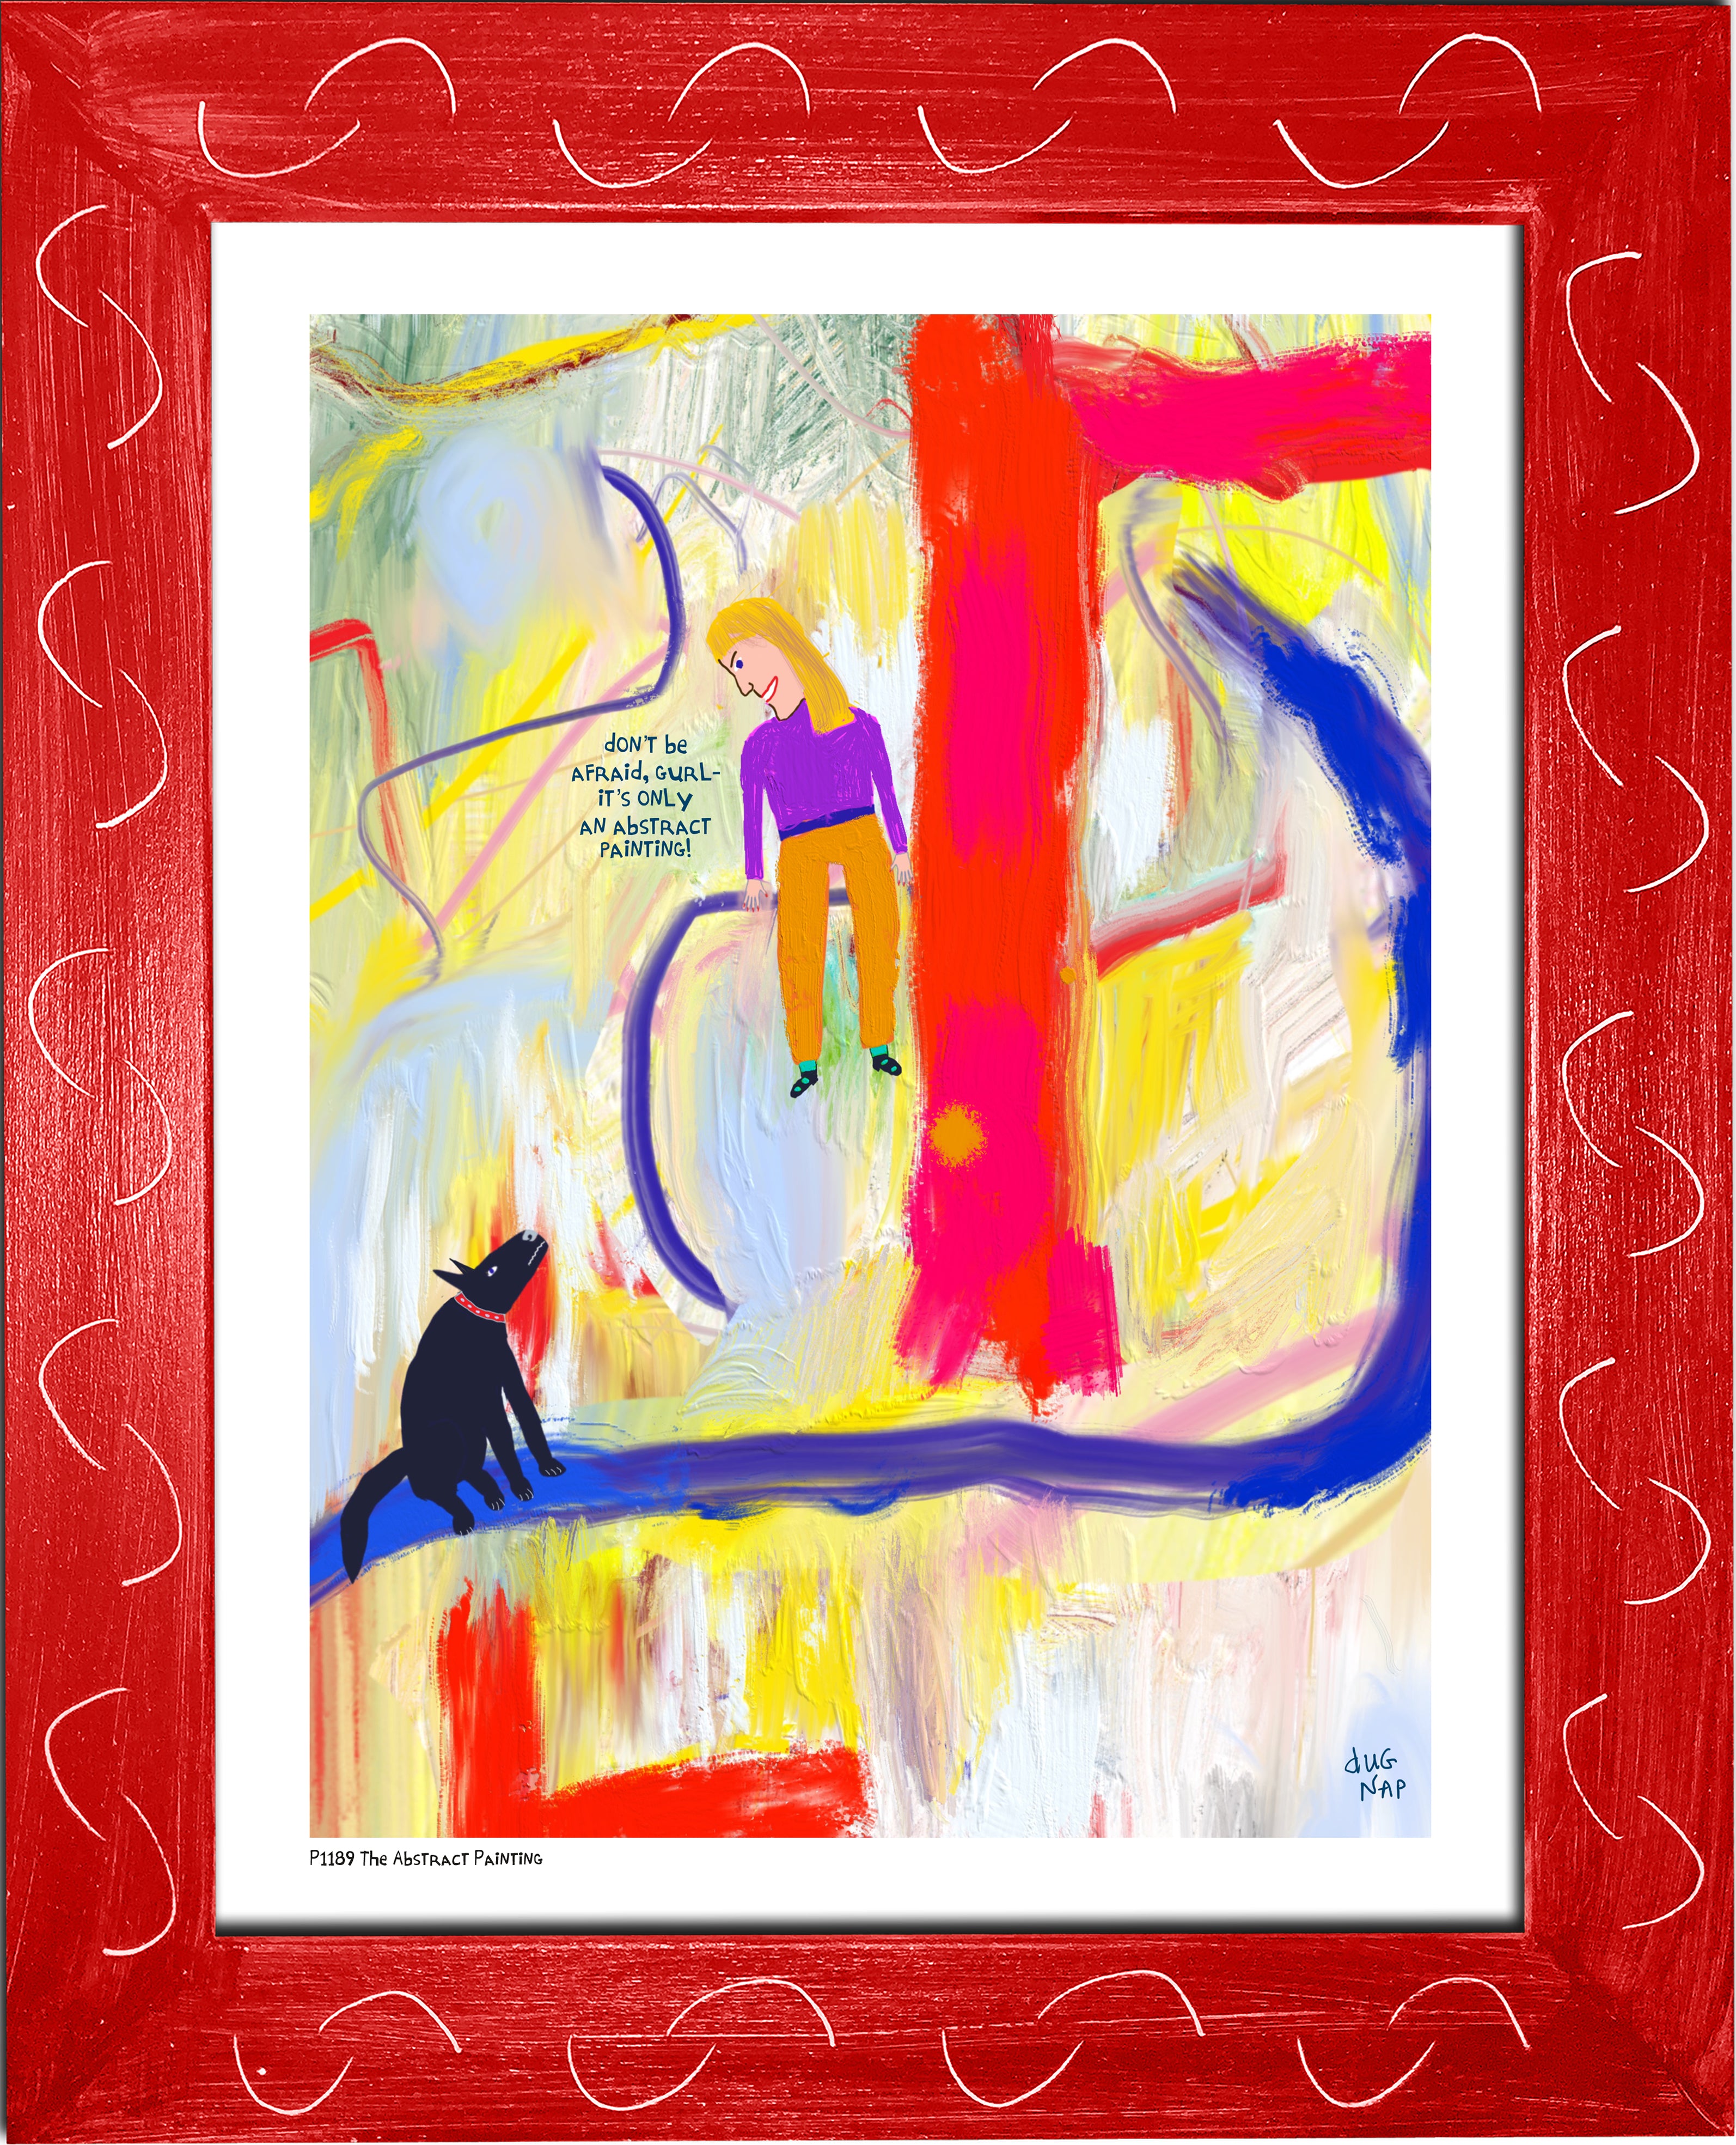 P1189 - The Abstract Painting